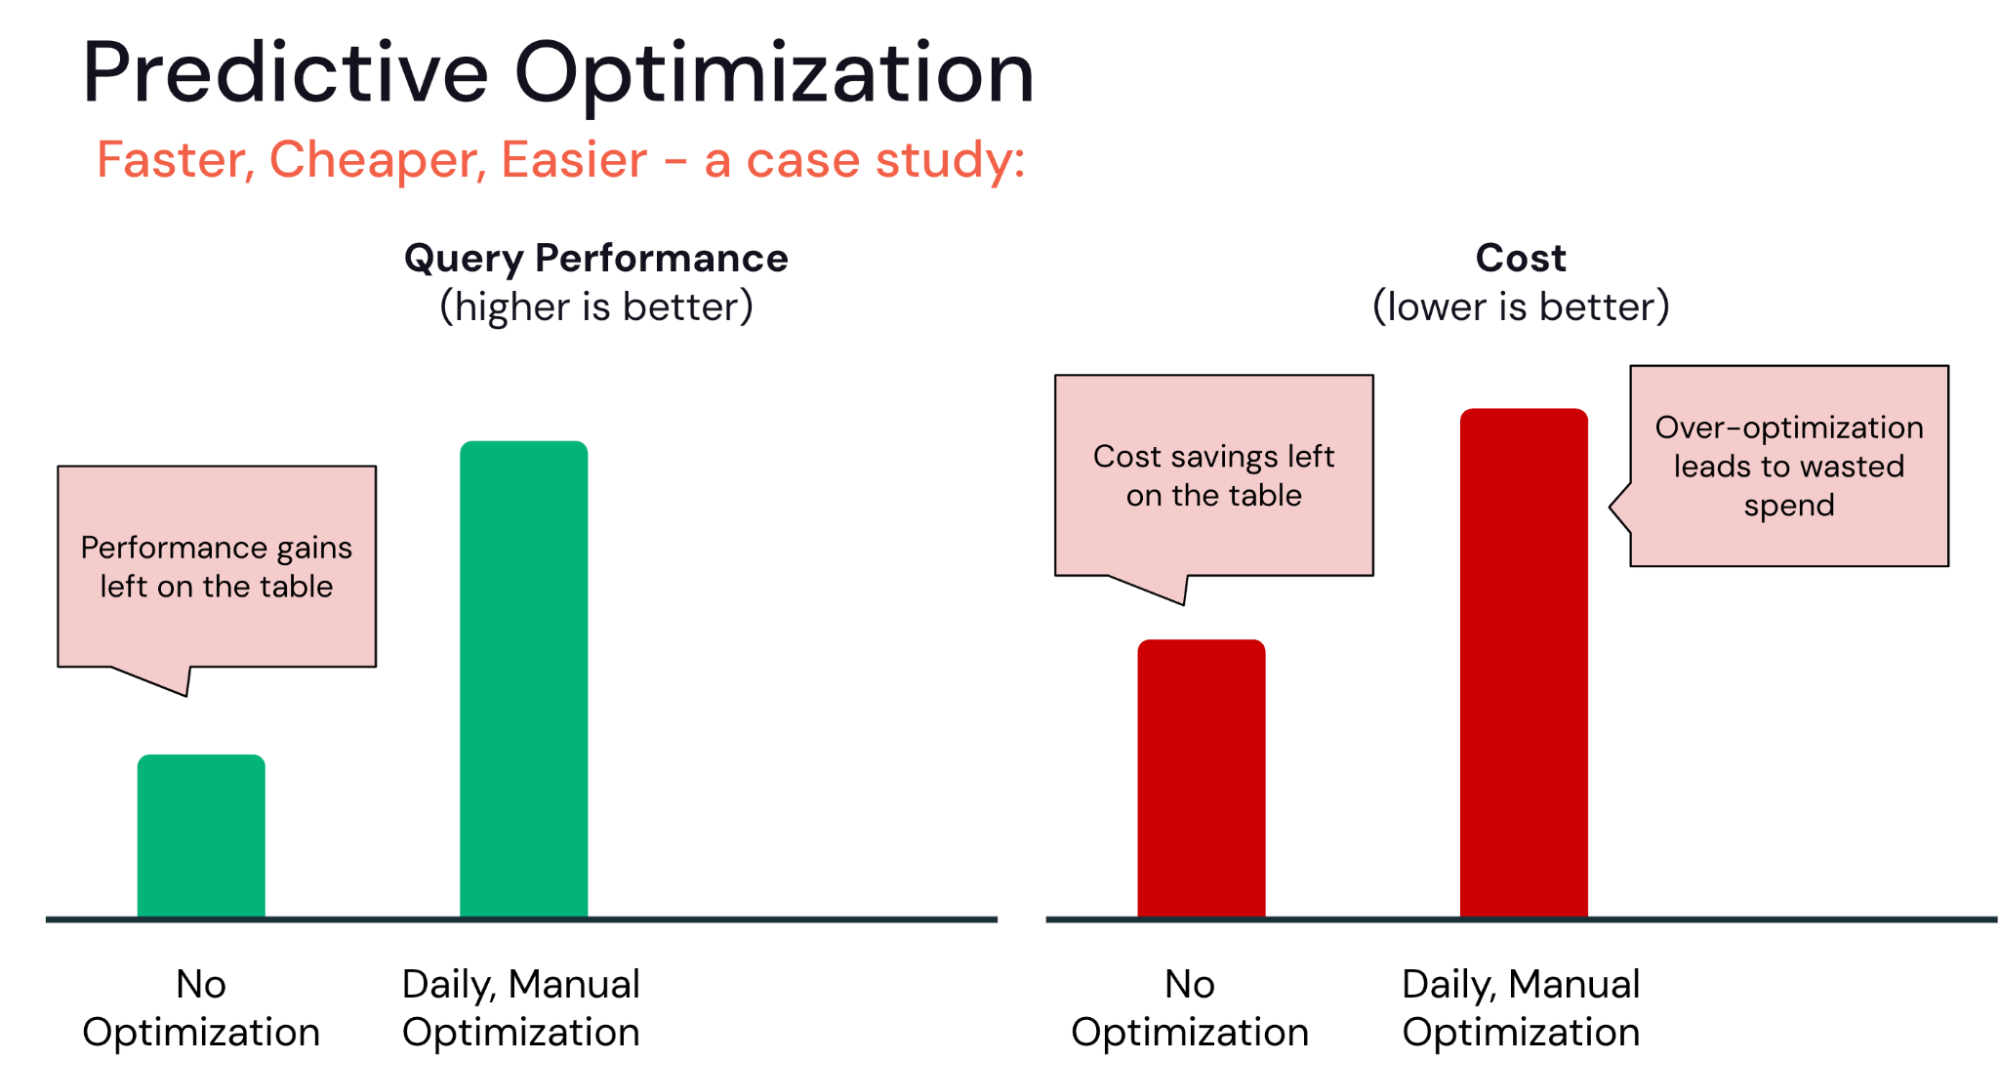 Side by side images show the tradeoffs between query performance and cost between no optimizations at all and daily, manual optimizations.